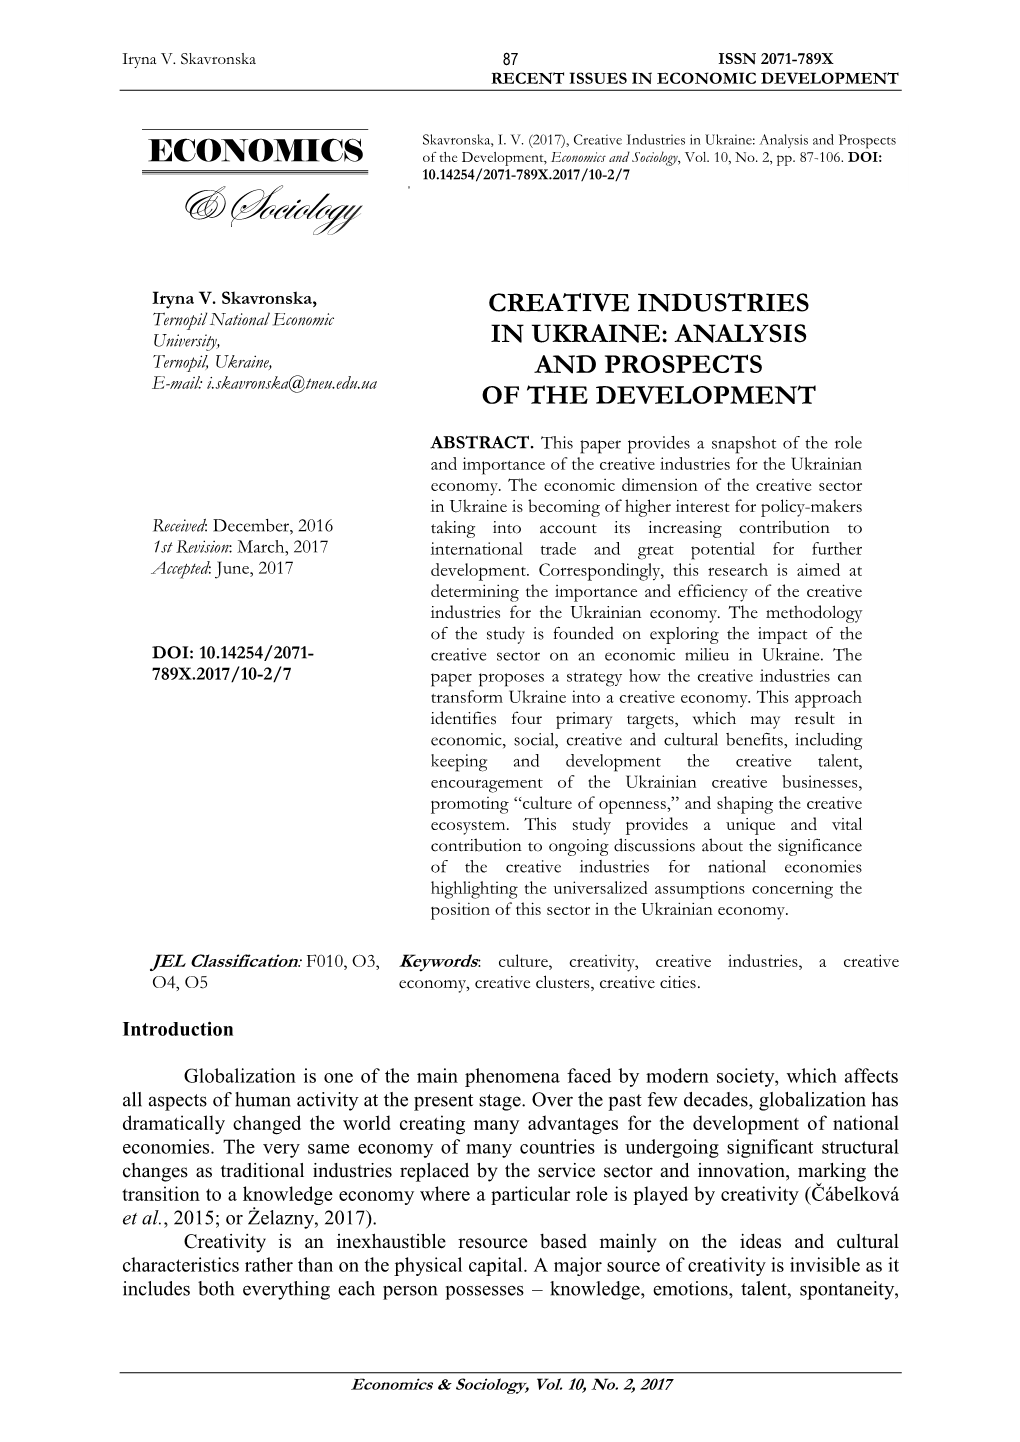 Creative Industries in Ukraine: Analysis and Prospects of the Development, Economics and Sociology, Vol